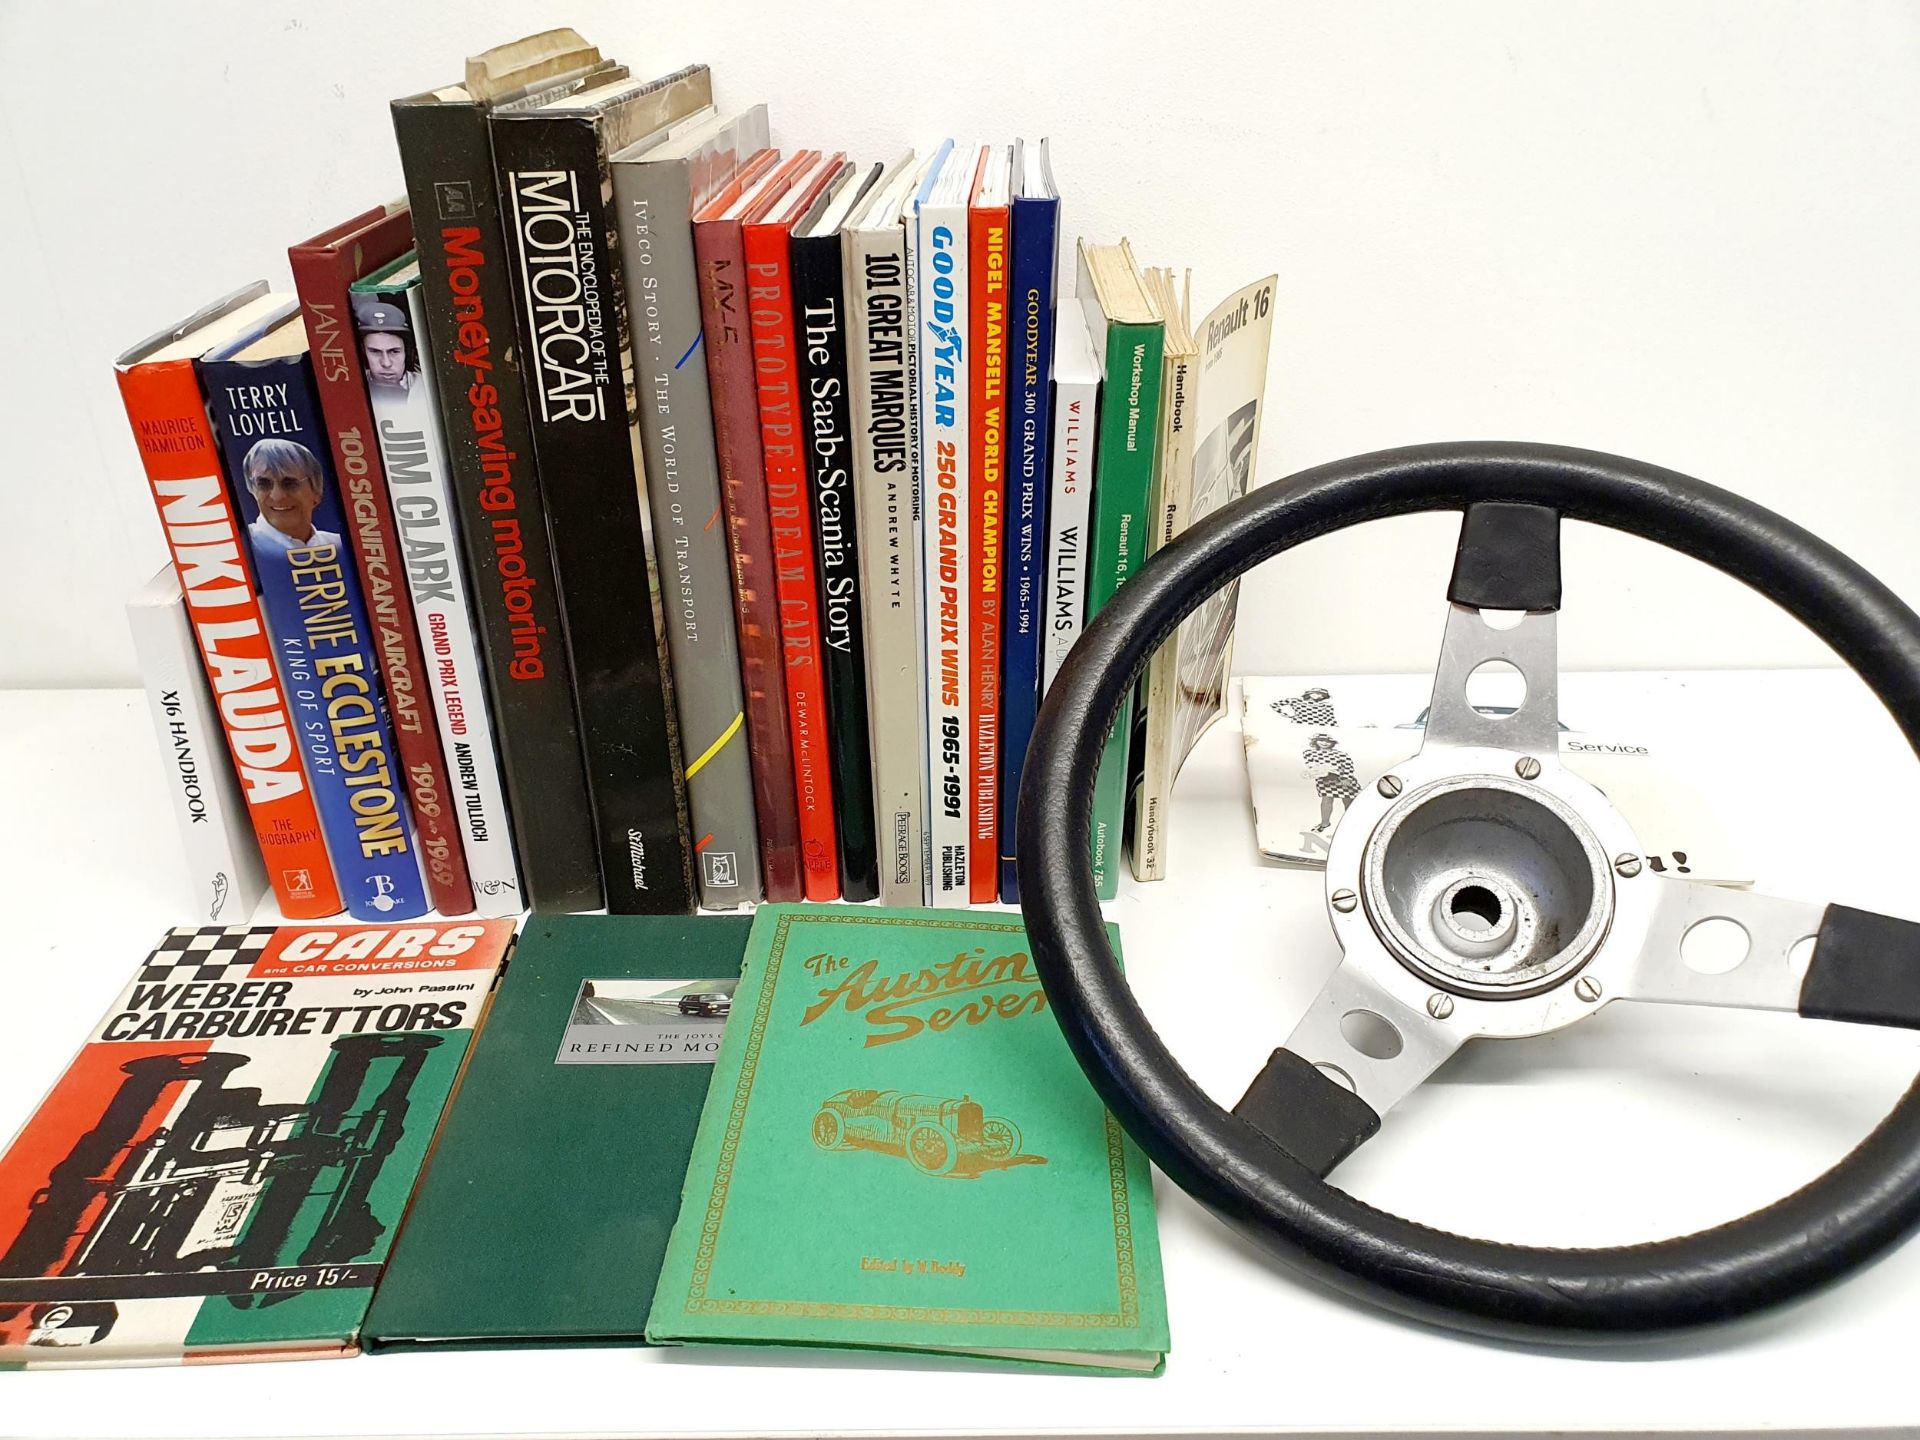 ***Withdrawn***The steering wheel from a Mini Cooper, assorted vehicle related books, a print, and a